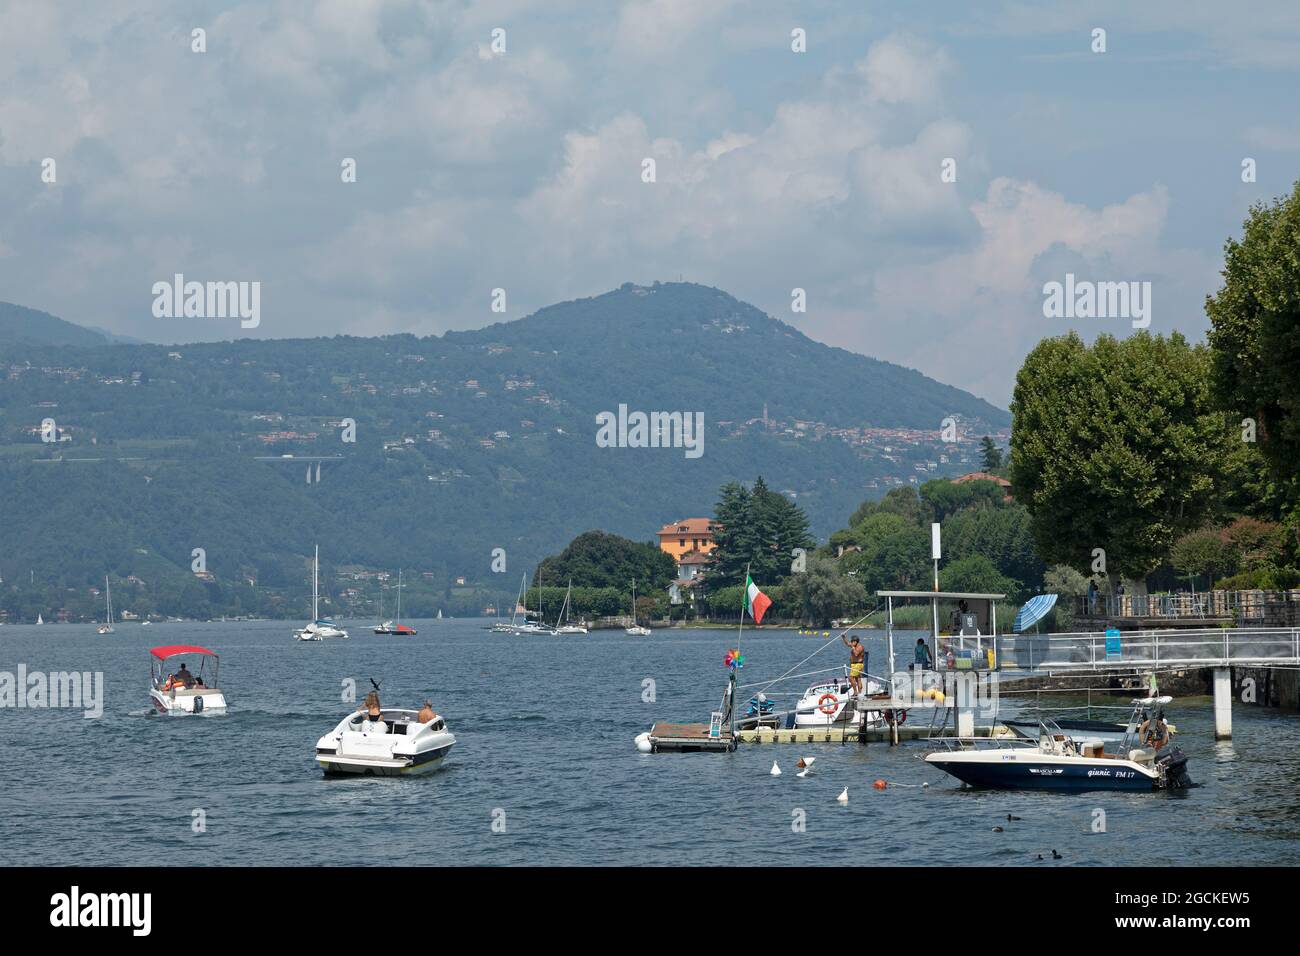 landing stage, Angera, Lake Maggiore, Lombardy, Italy Stock Photo